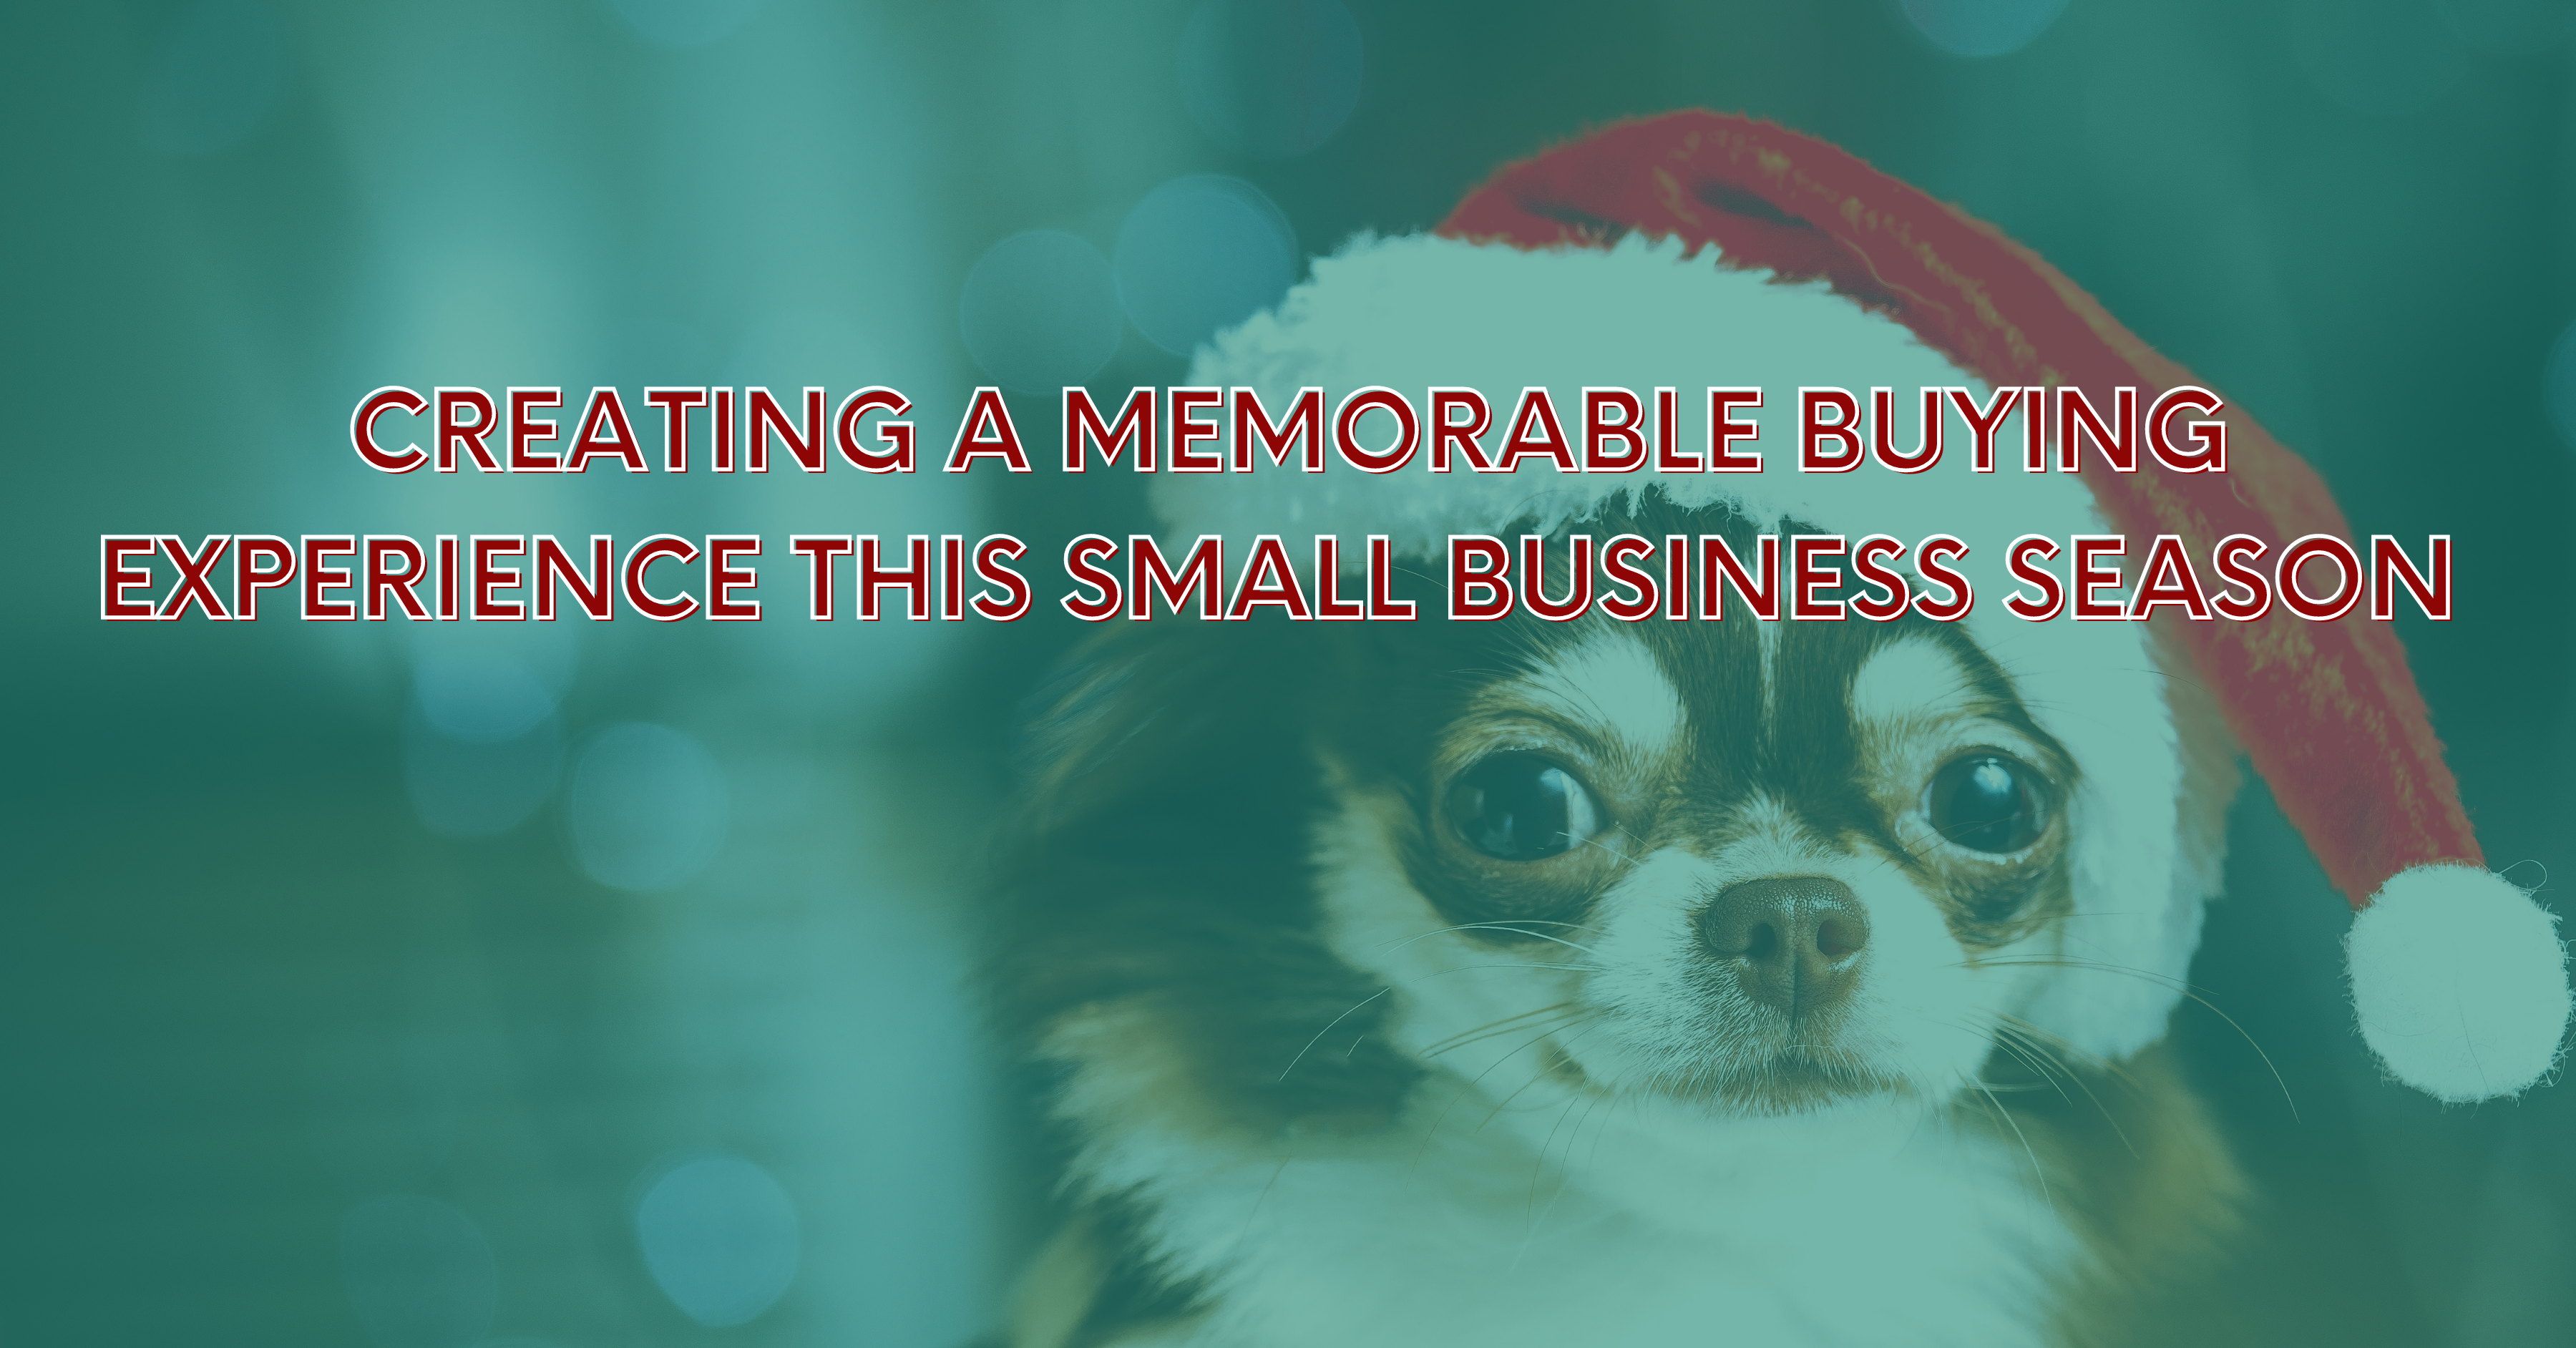 Creating a Memorable Buying Experience This Small Business Season